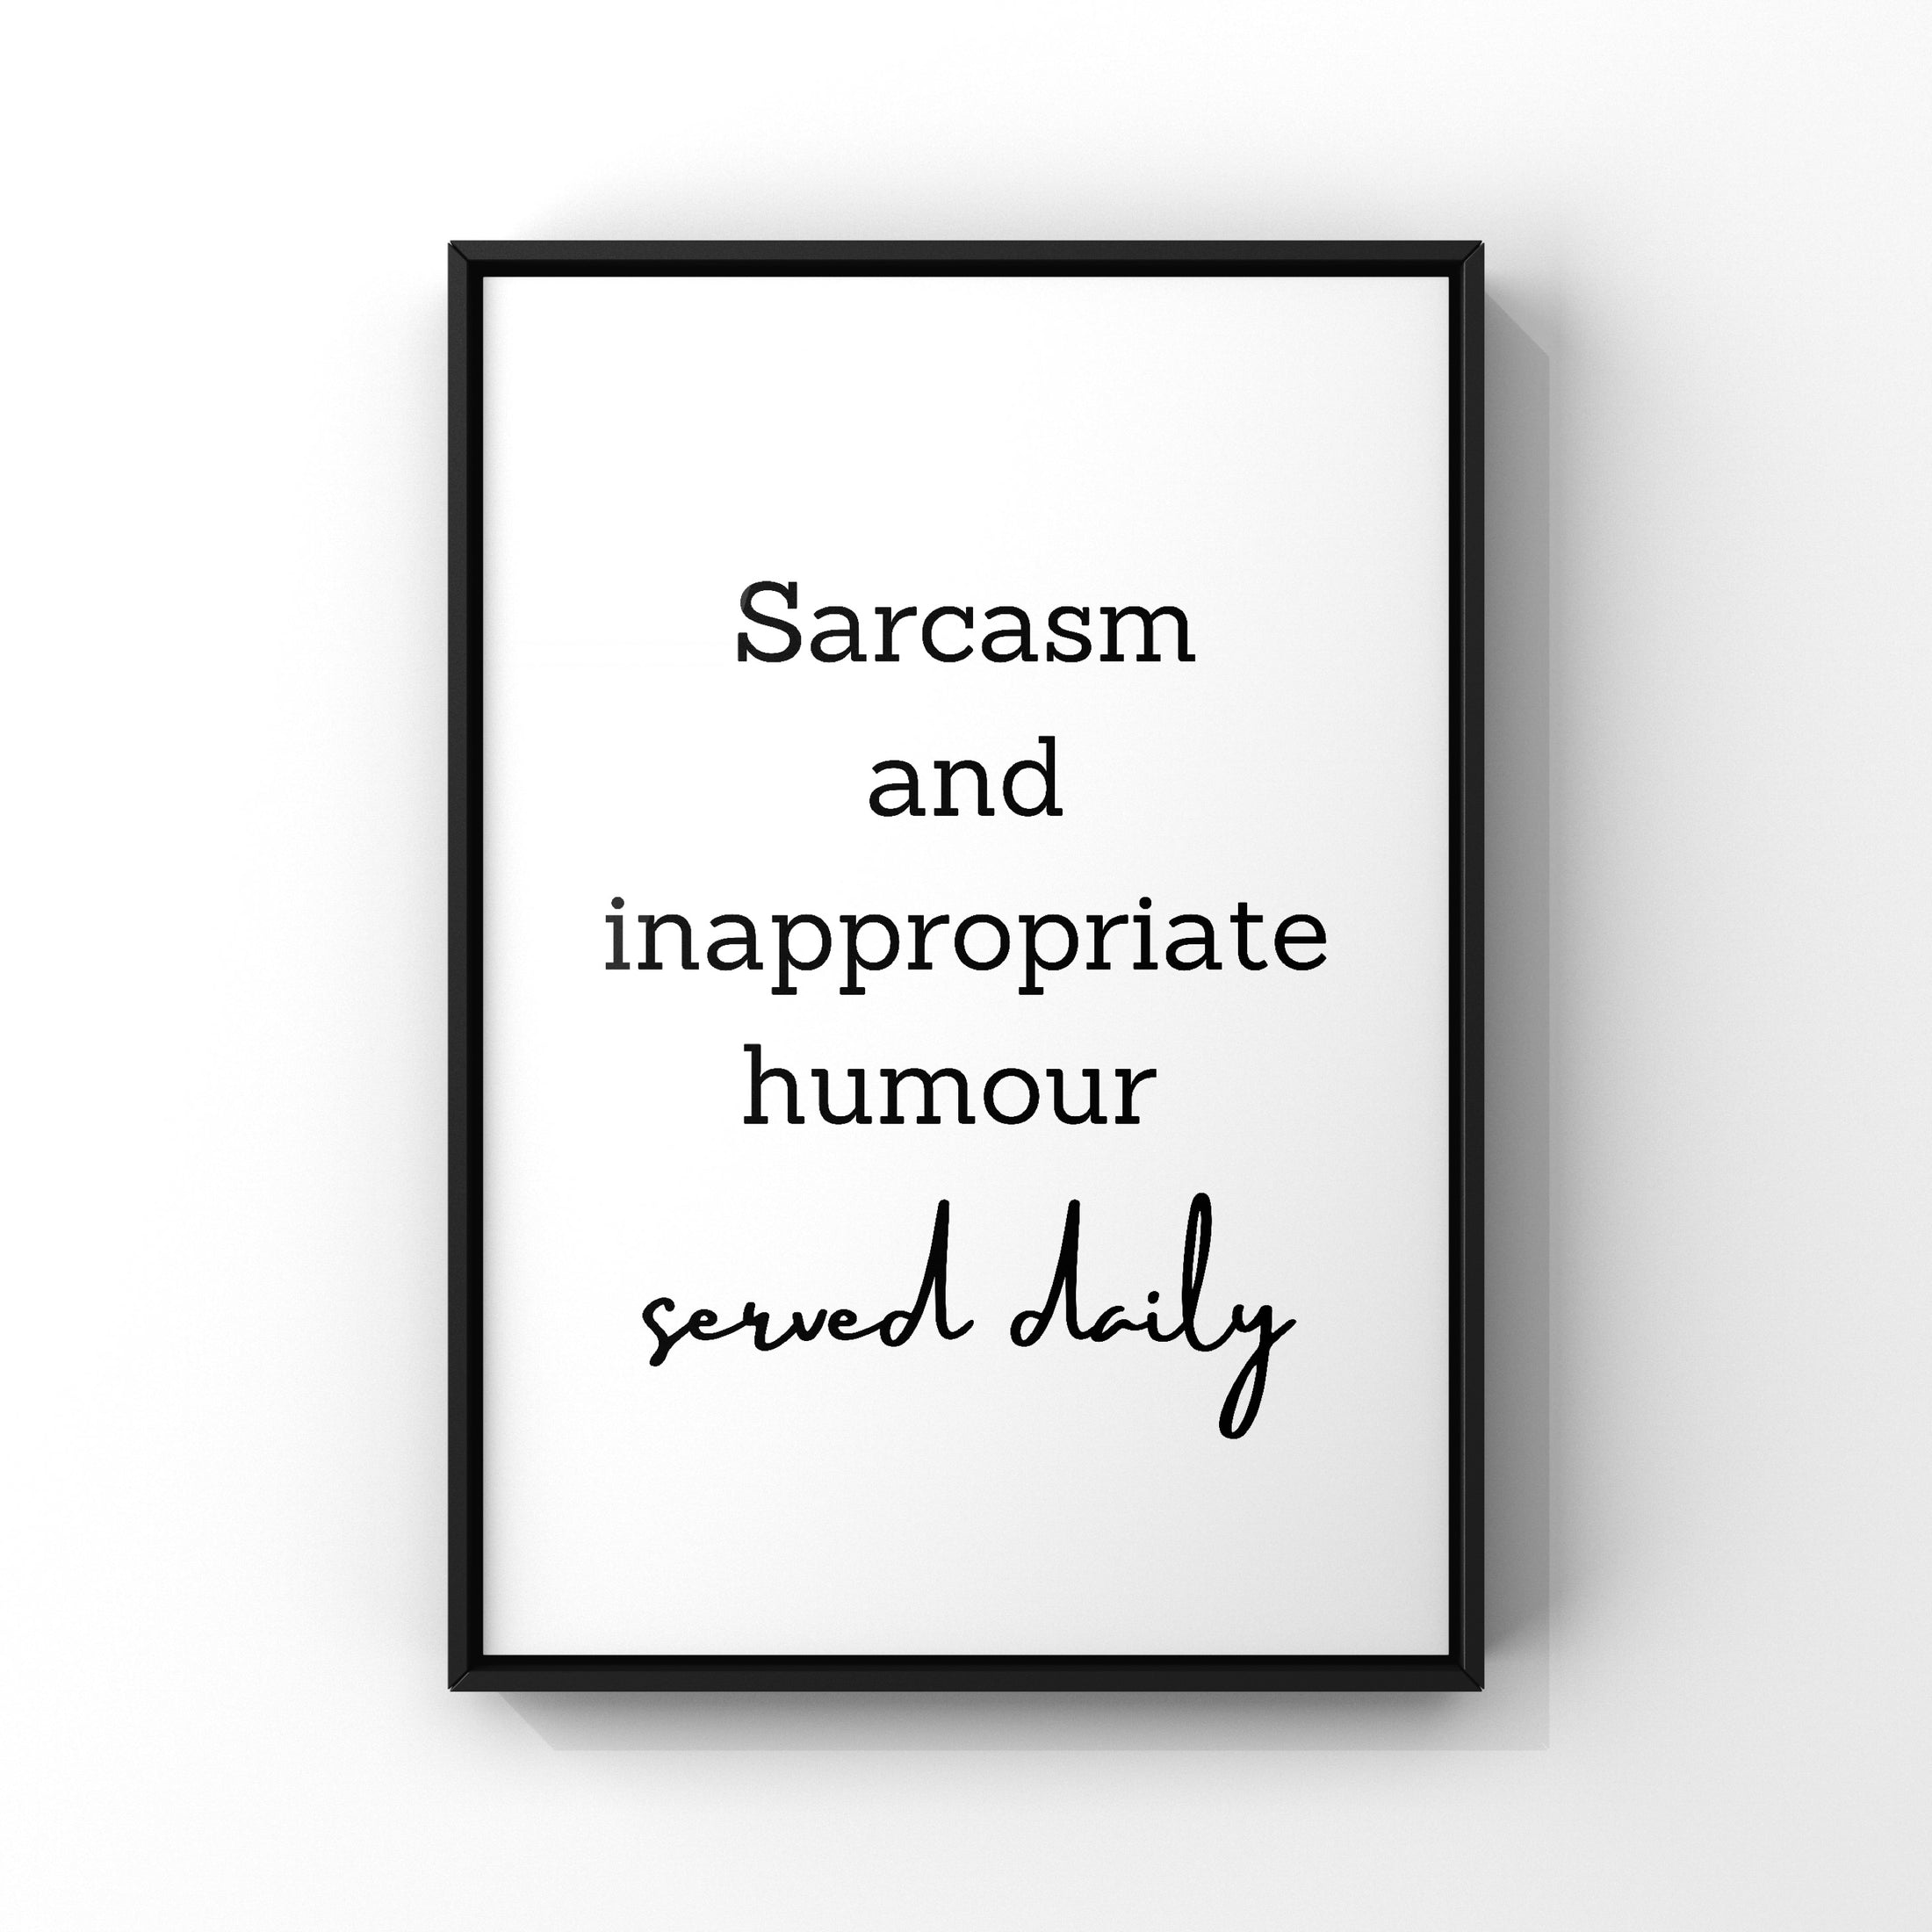 Sarcasm served daily